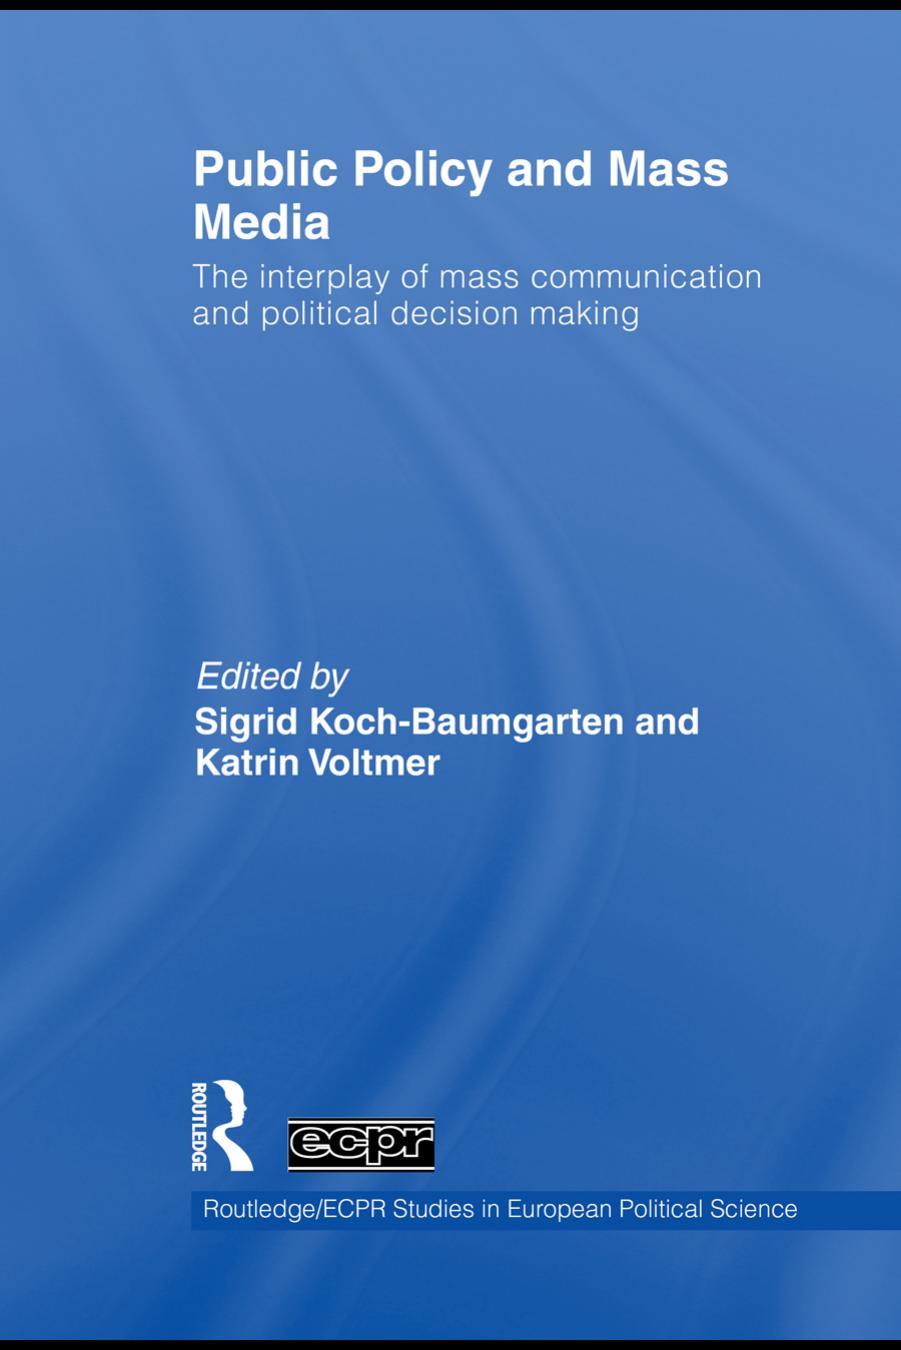 Public Policy and Mass Media: The interplay of mass communication and political decision making